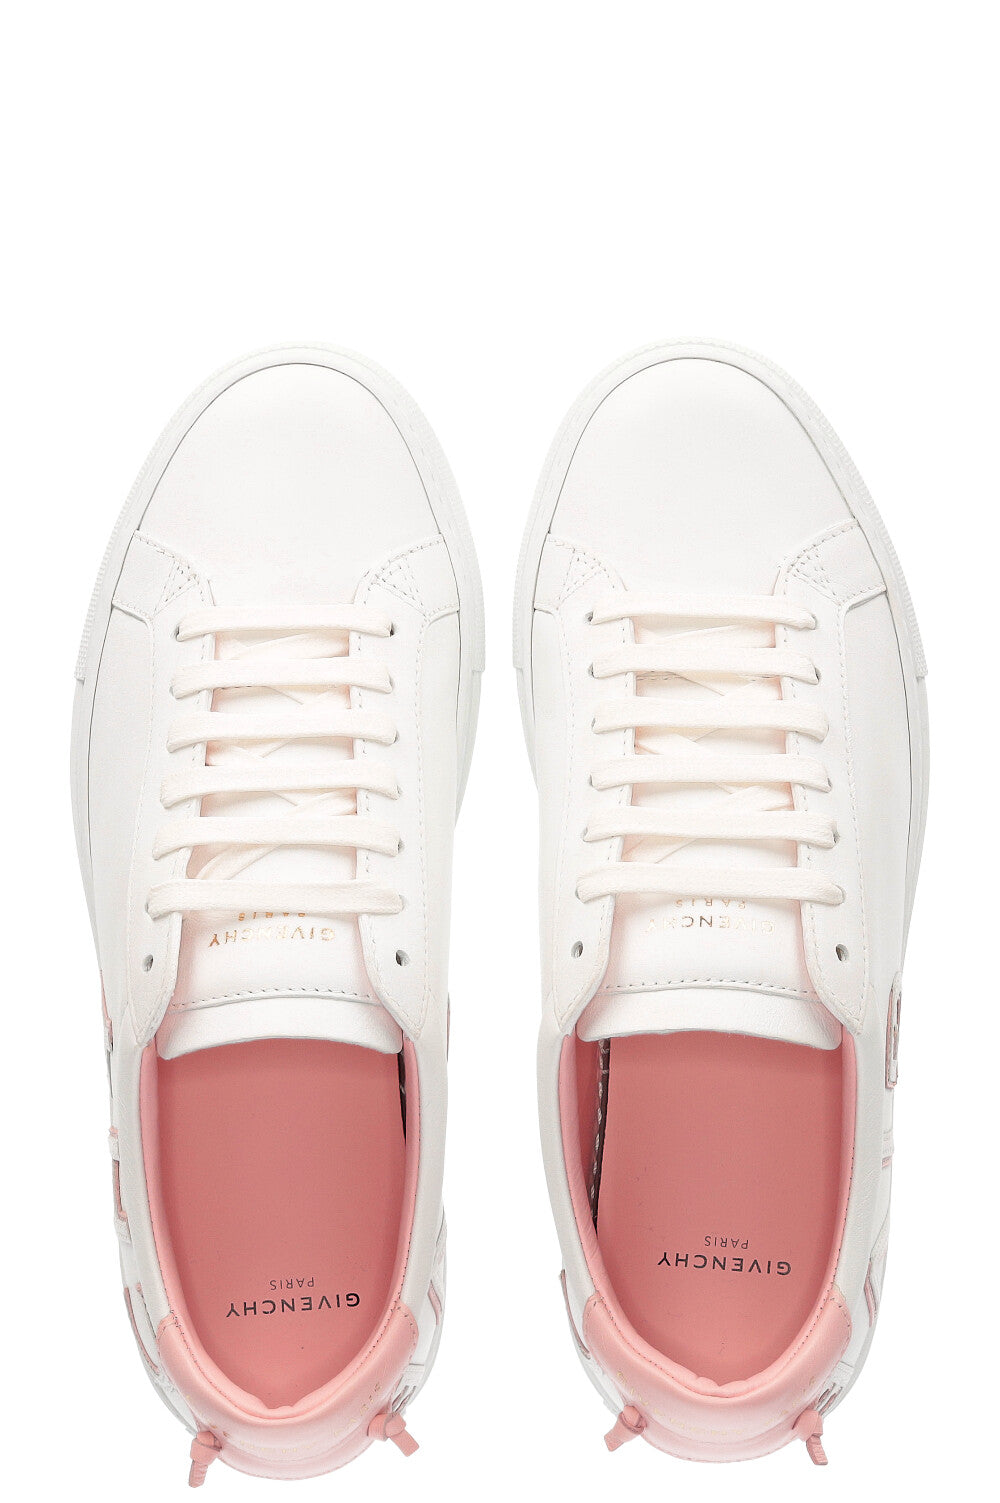 GIVENCHY Urban Street Sneakers White/Pink